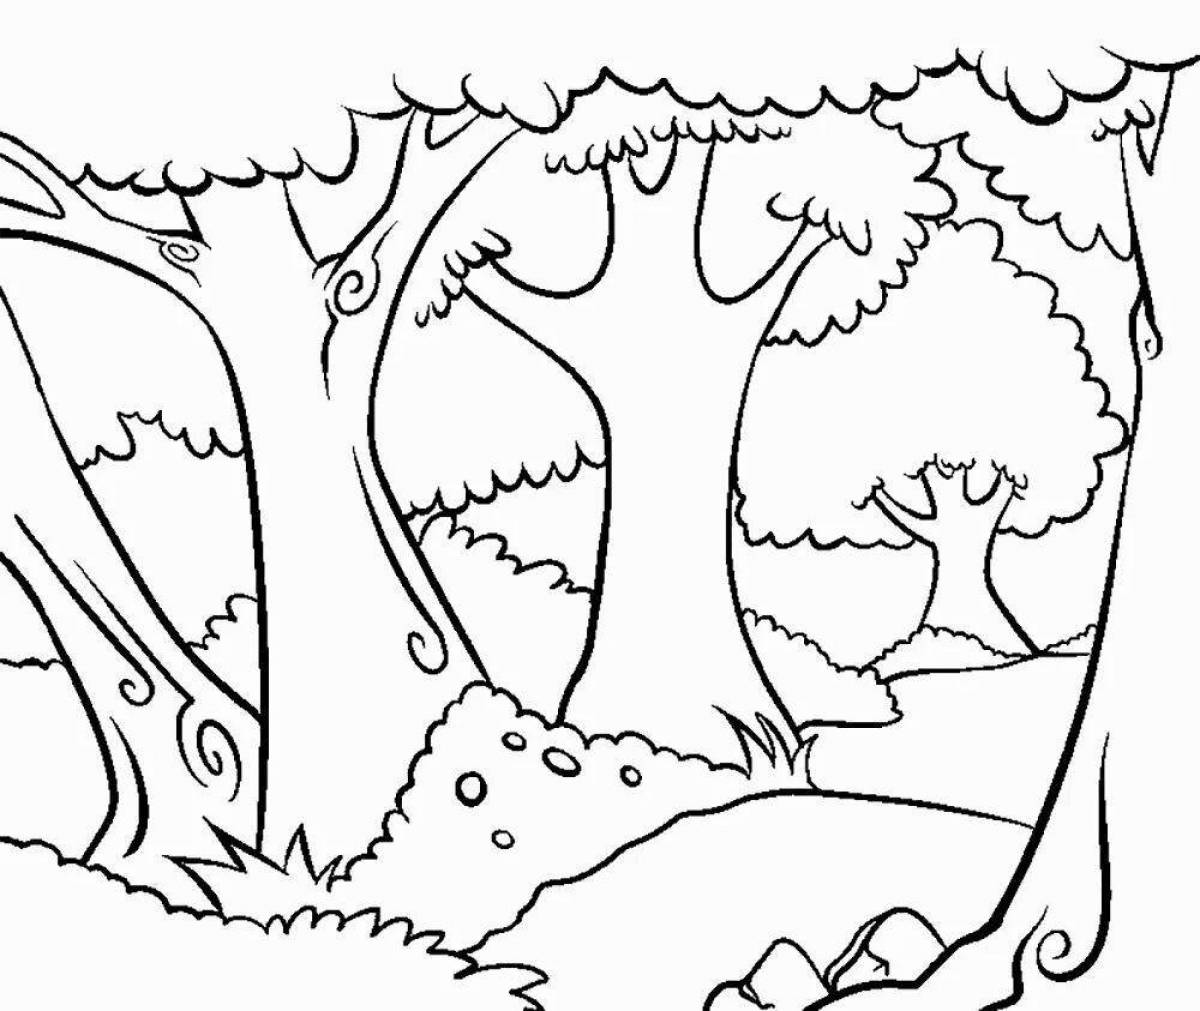 Bright pine forest coloring page